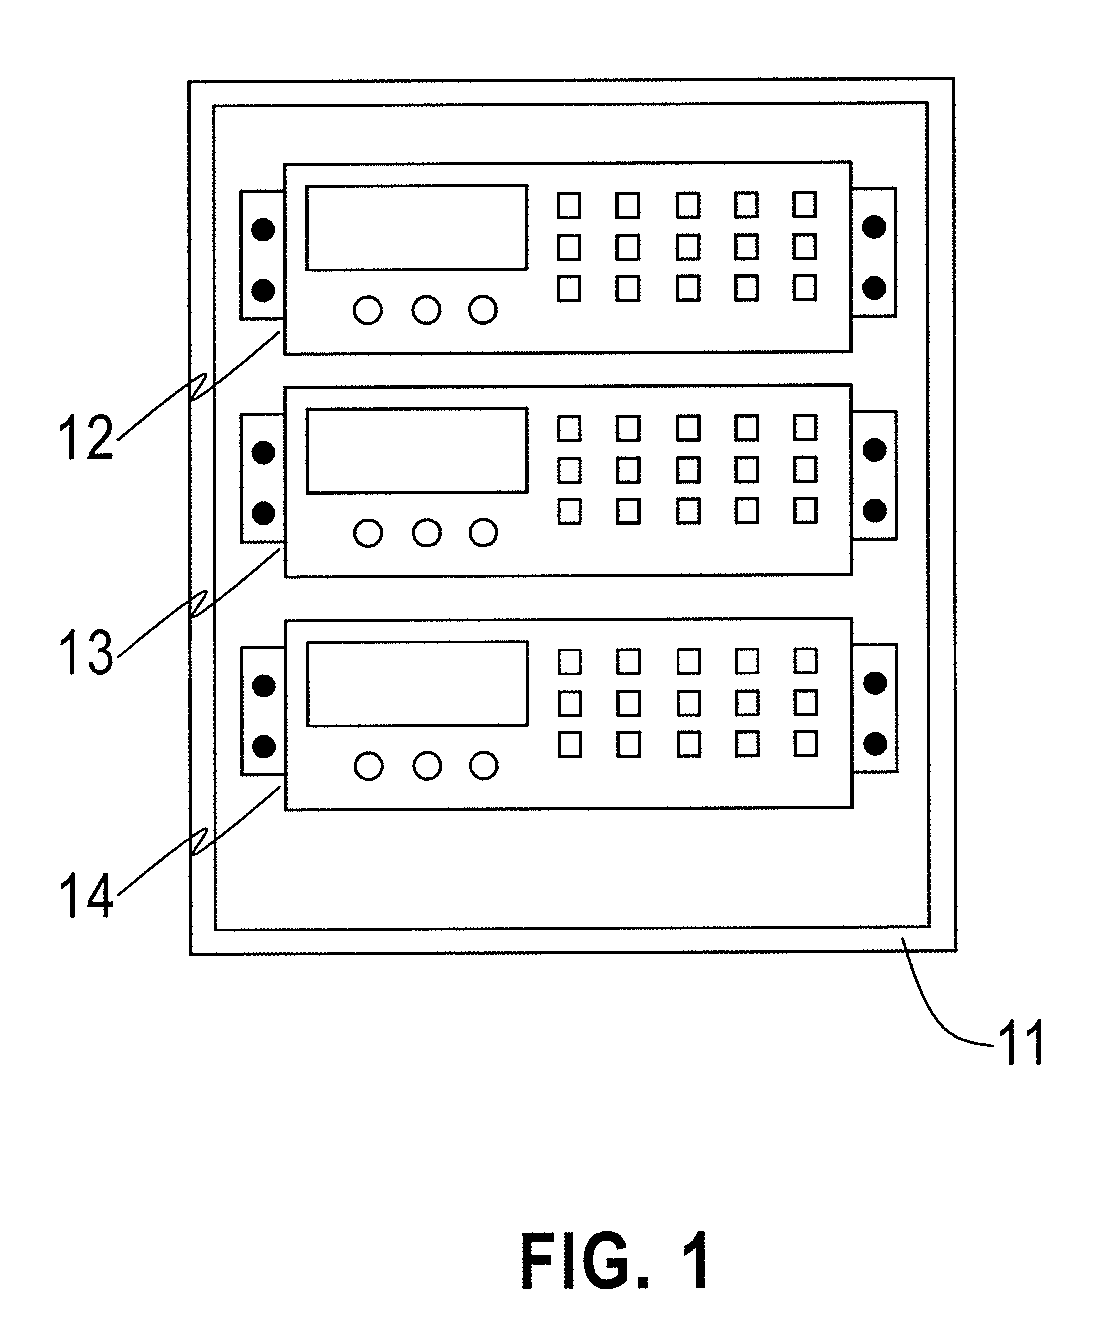 System and Method for Virtual Control of Laboratory Equipment